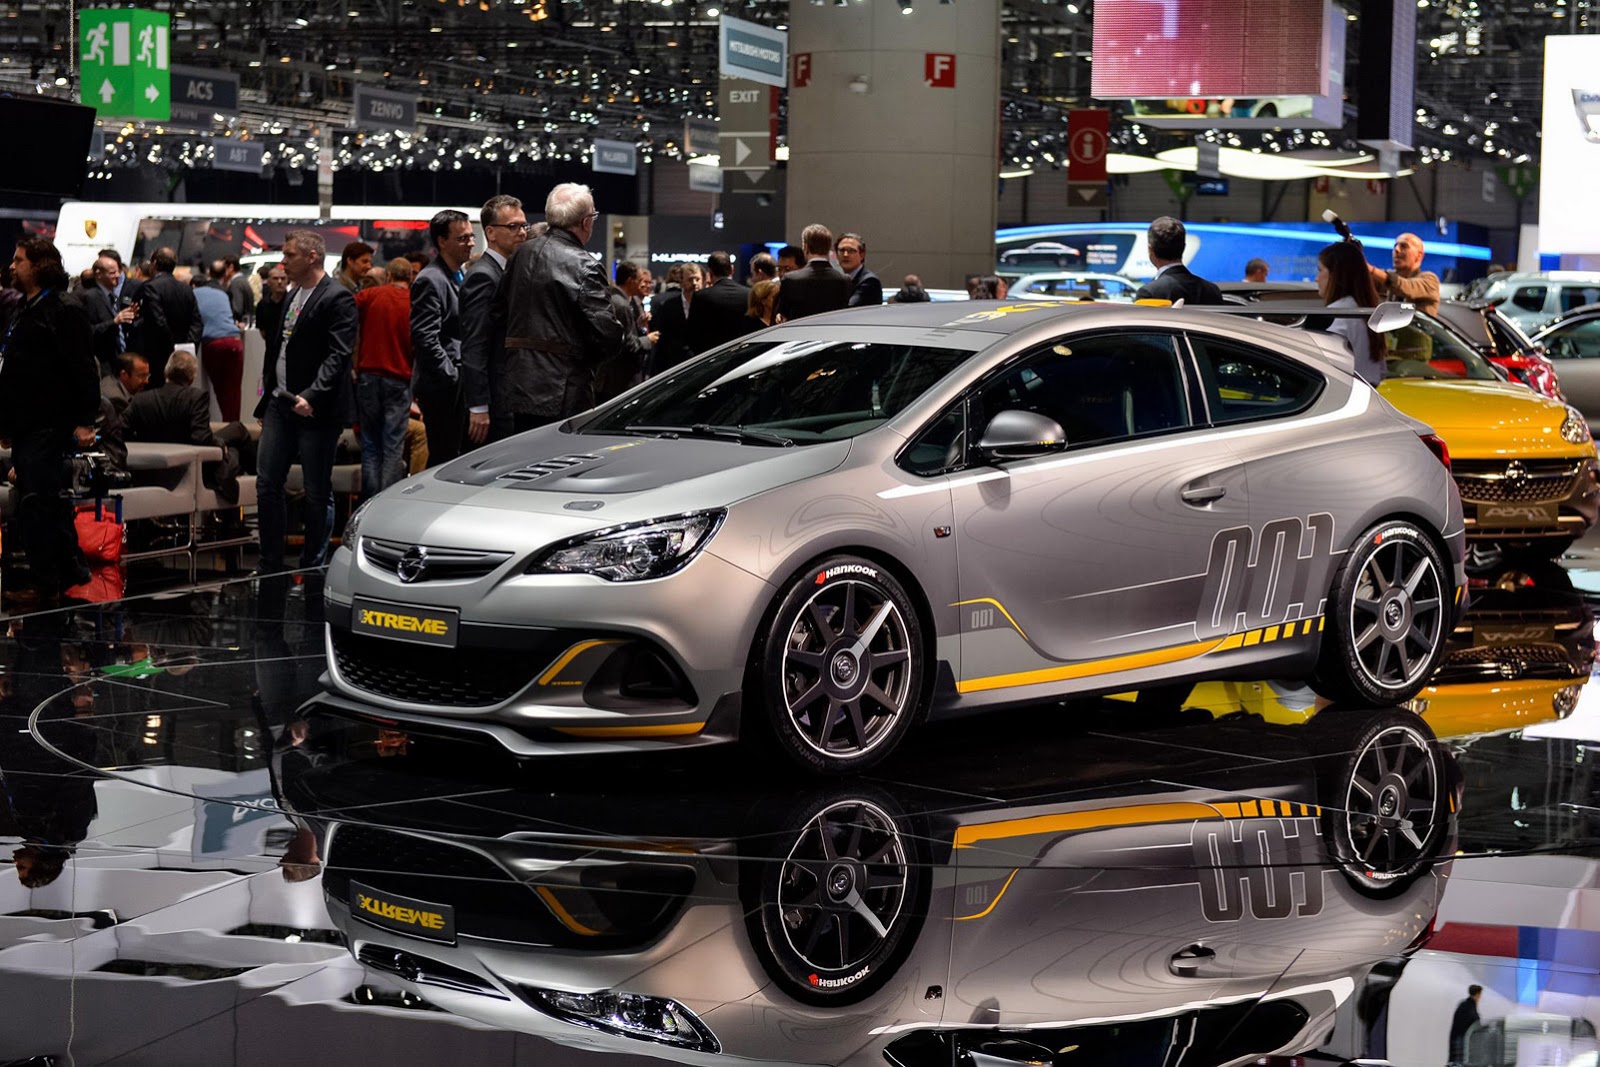 Opel Astra OPC Extreme Begs to be Produced and Raced Against